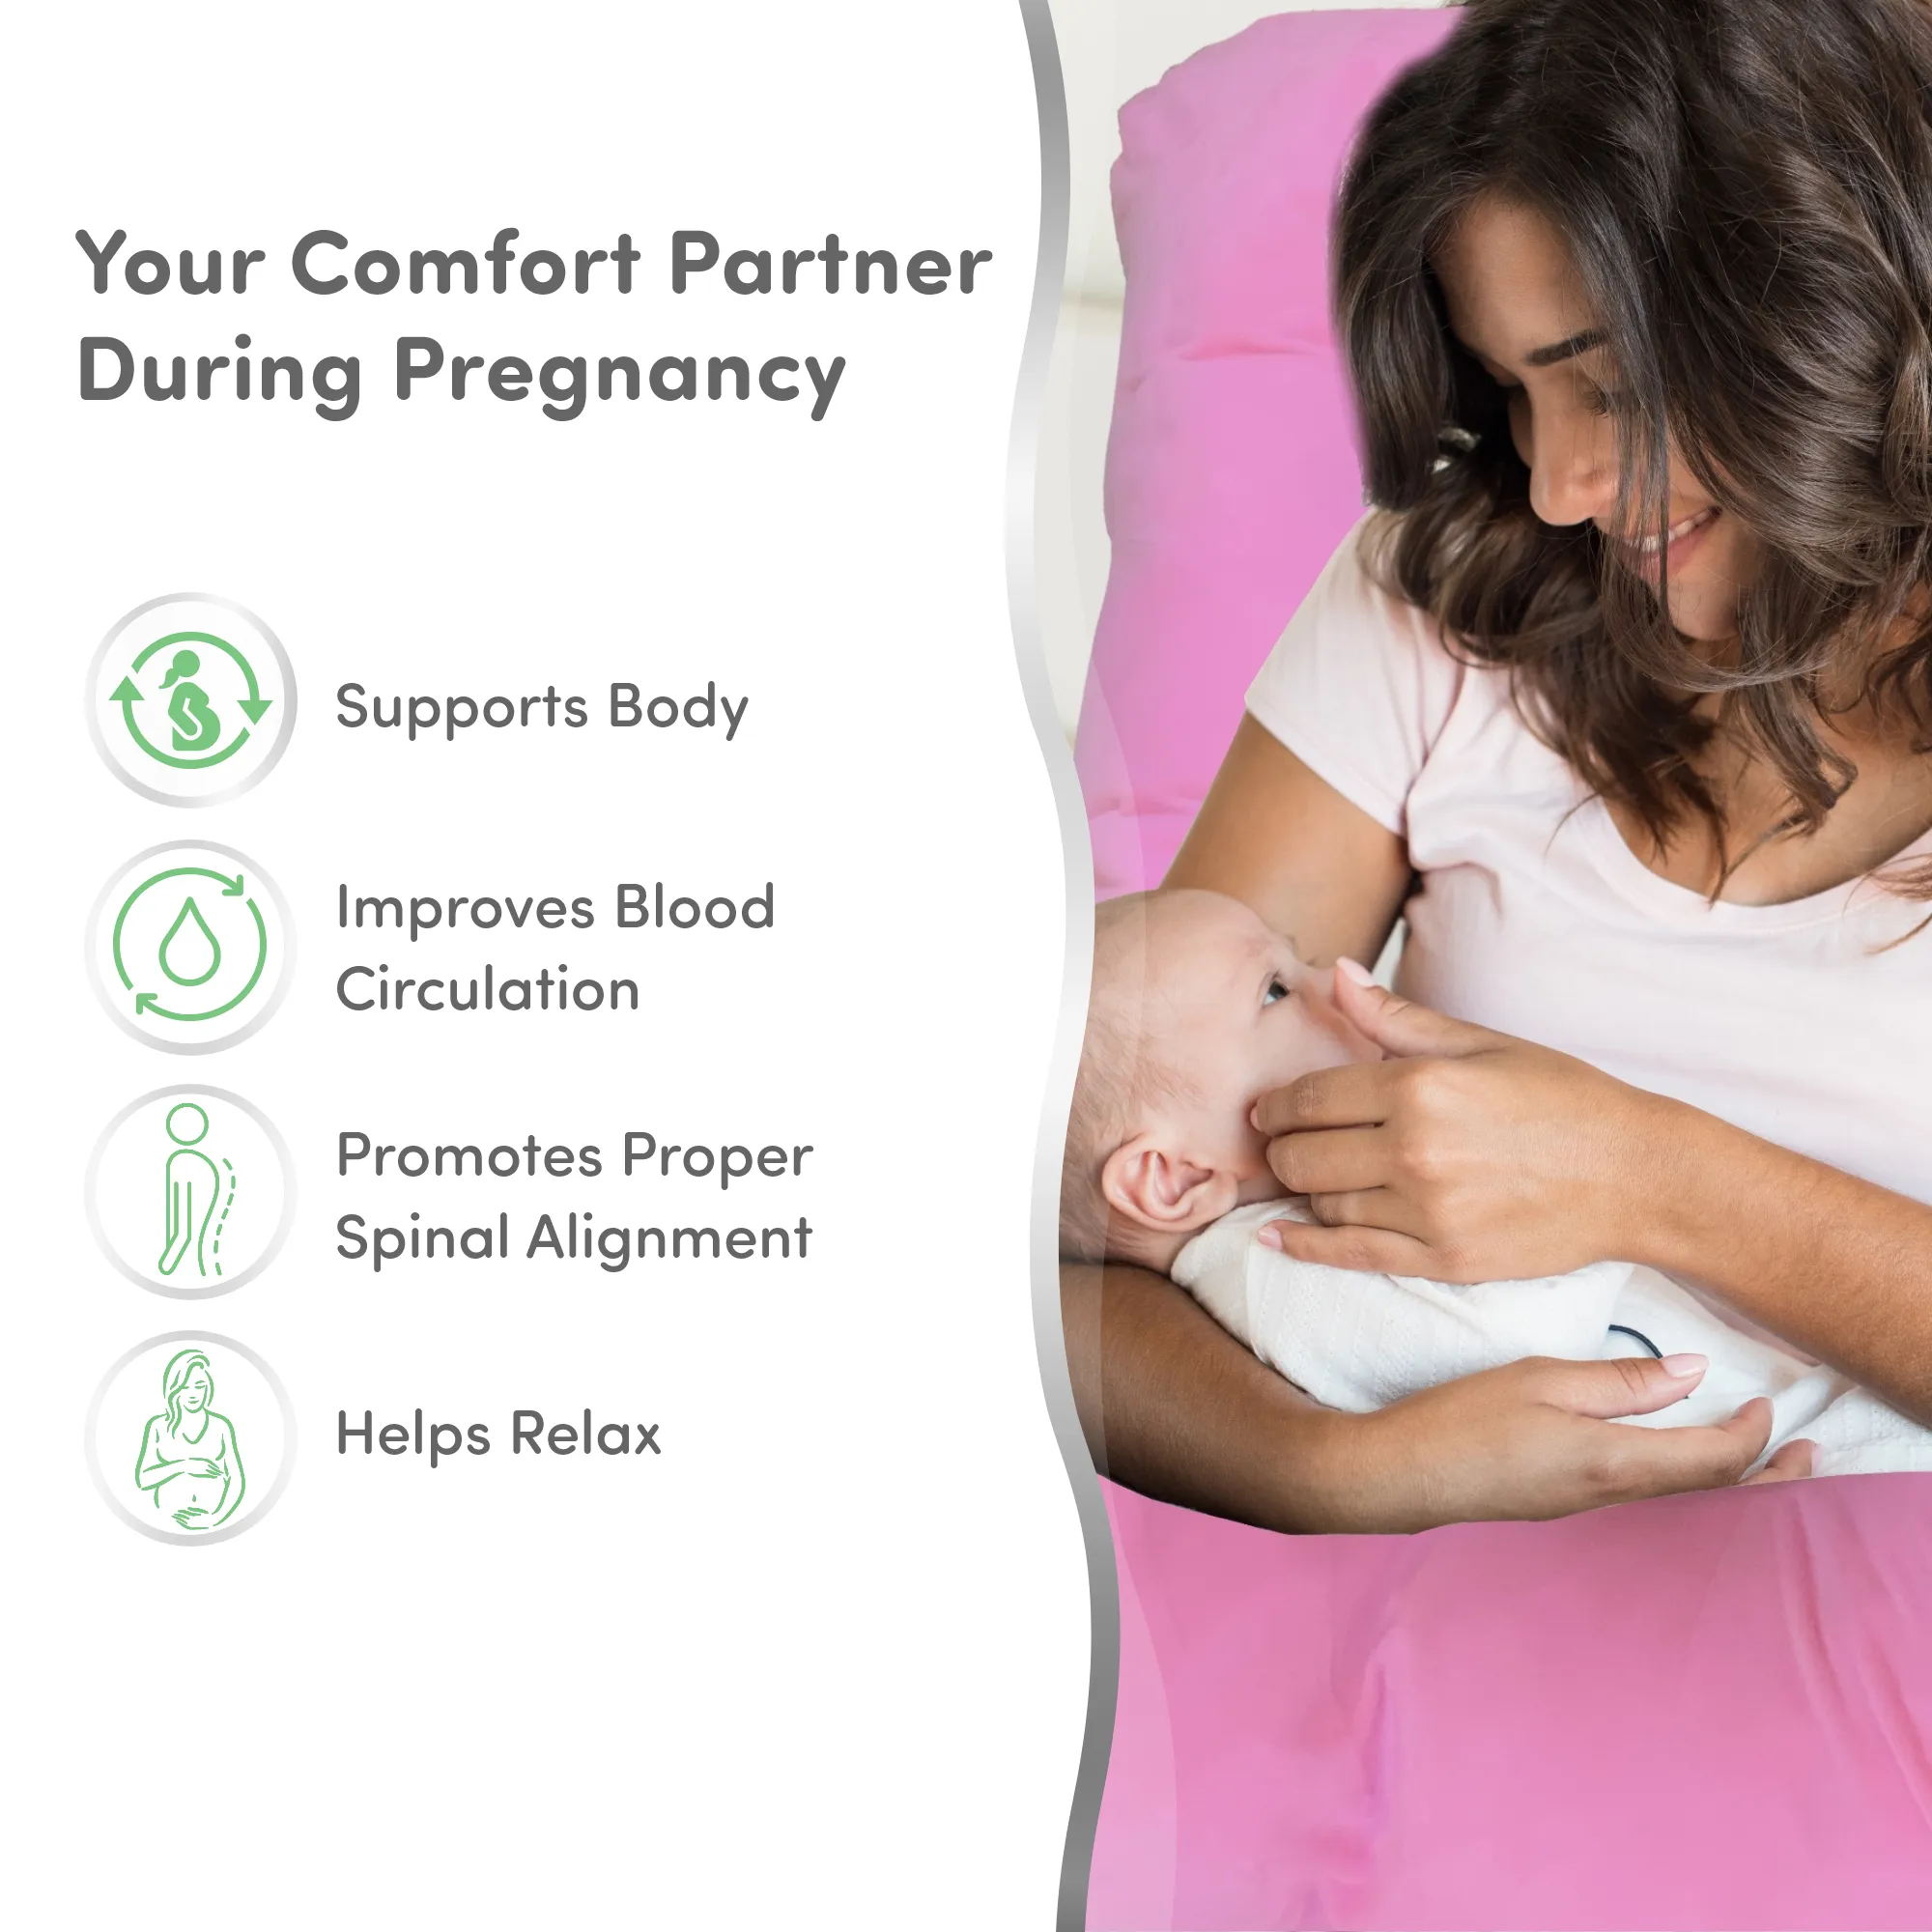 5 Tools to Promote Sleeping During Pregnancy - Hullo